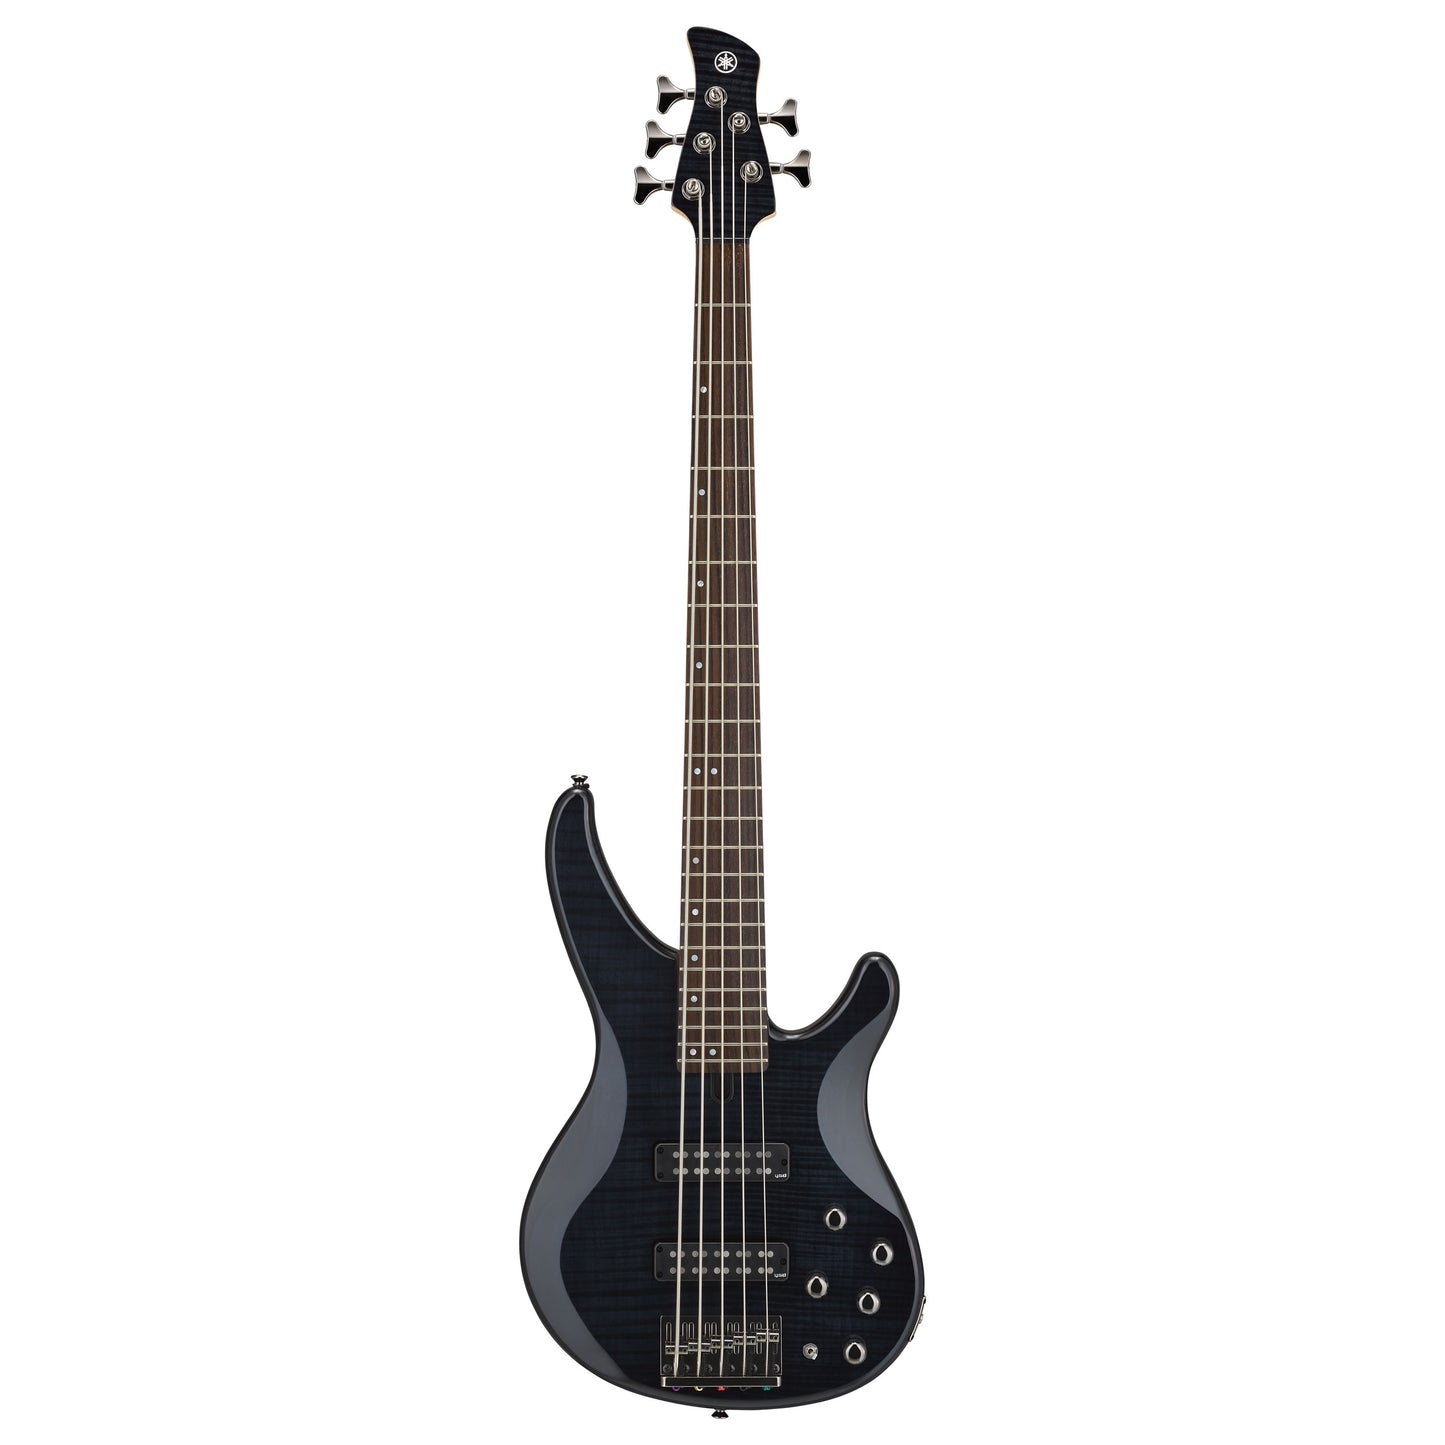 Yamaha TRBX605FMTBL 5 String Bass with Flame Maple Top in Trans Black